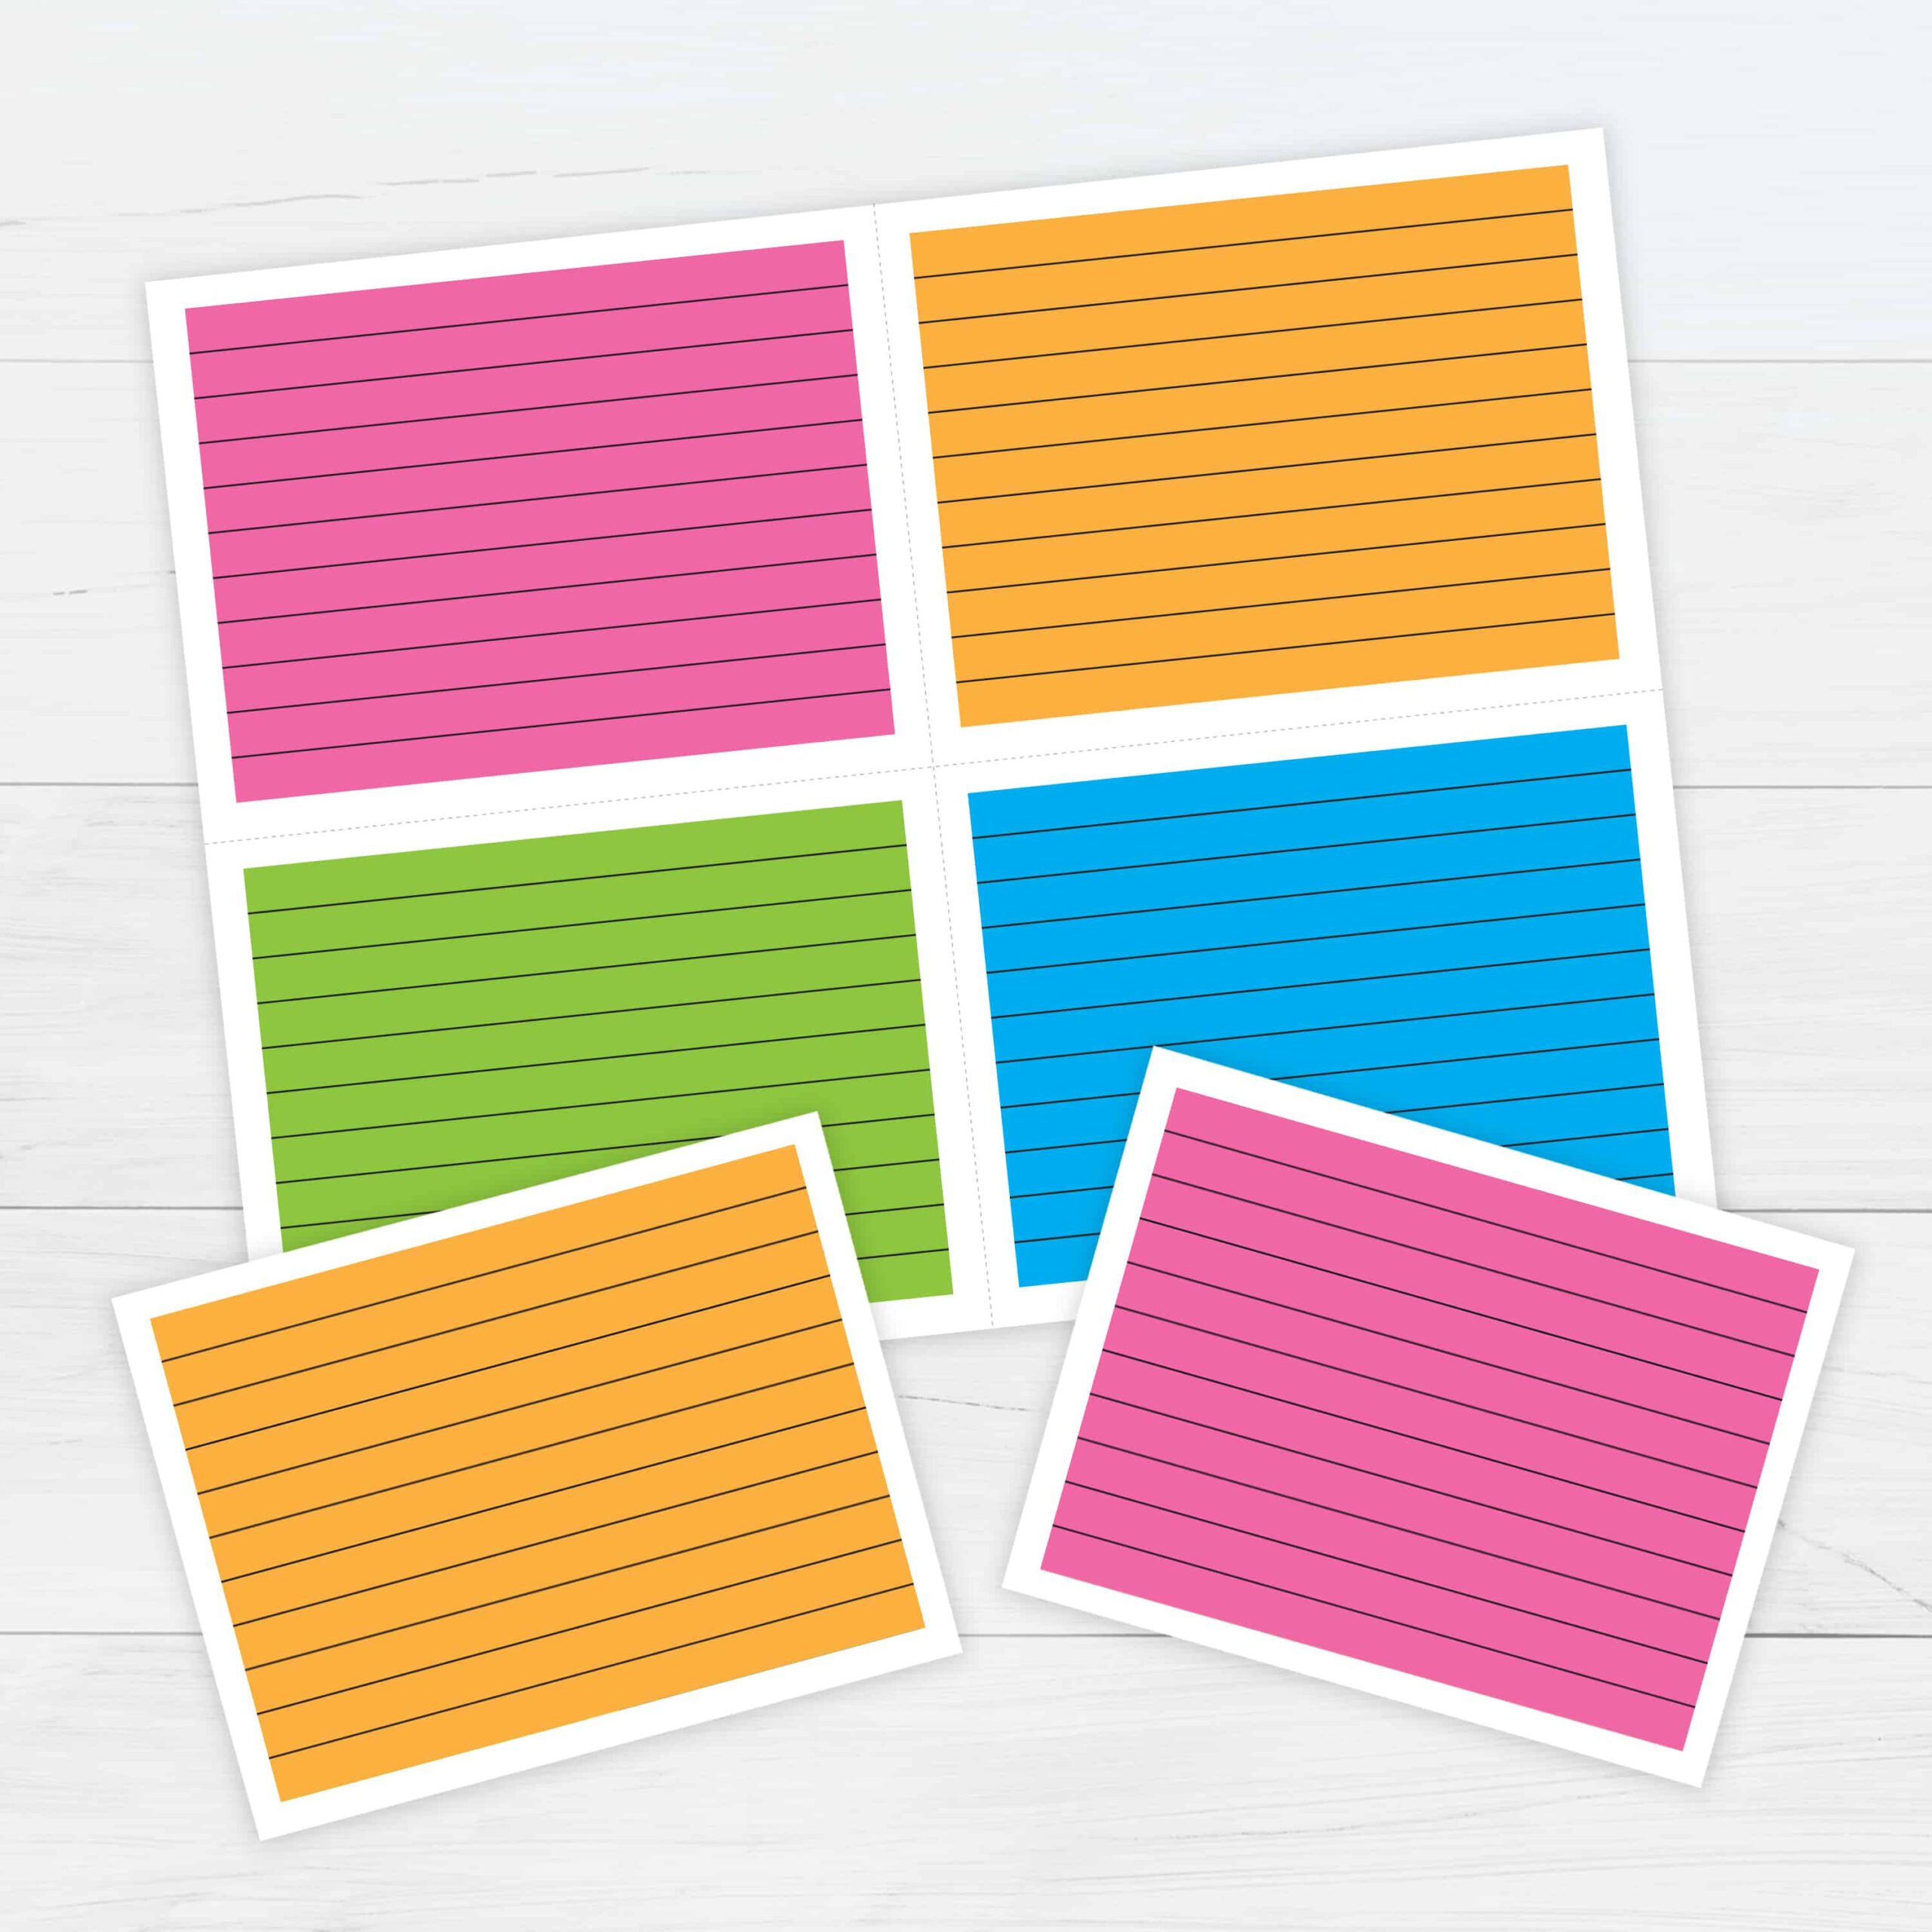 Color Ruled Index Cards Template - Free Printable Download with Free Printable Index Cards